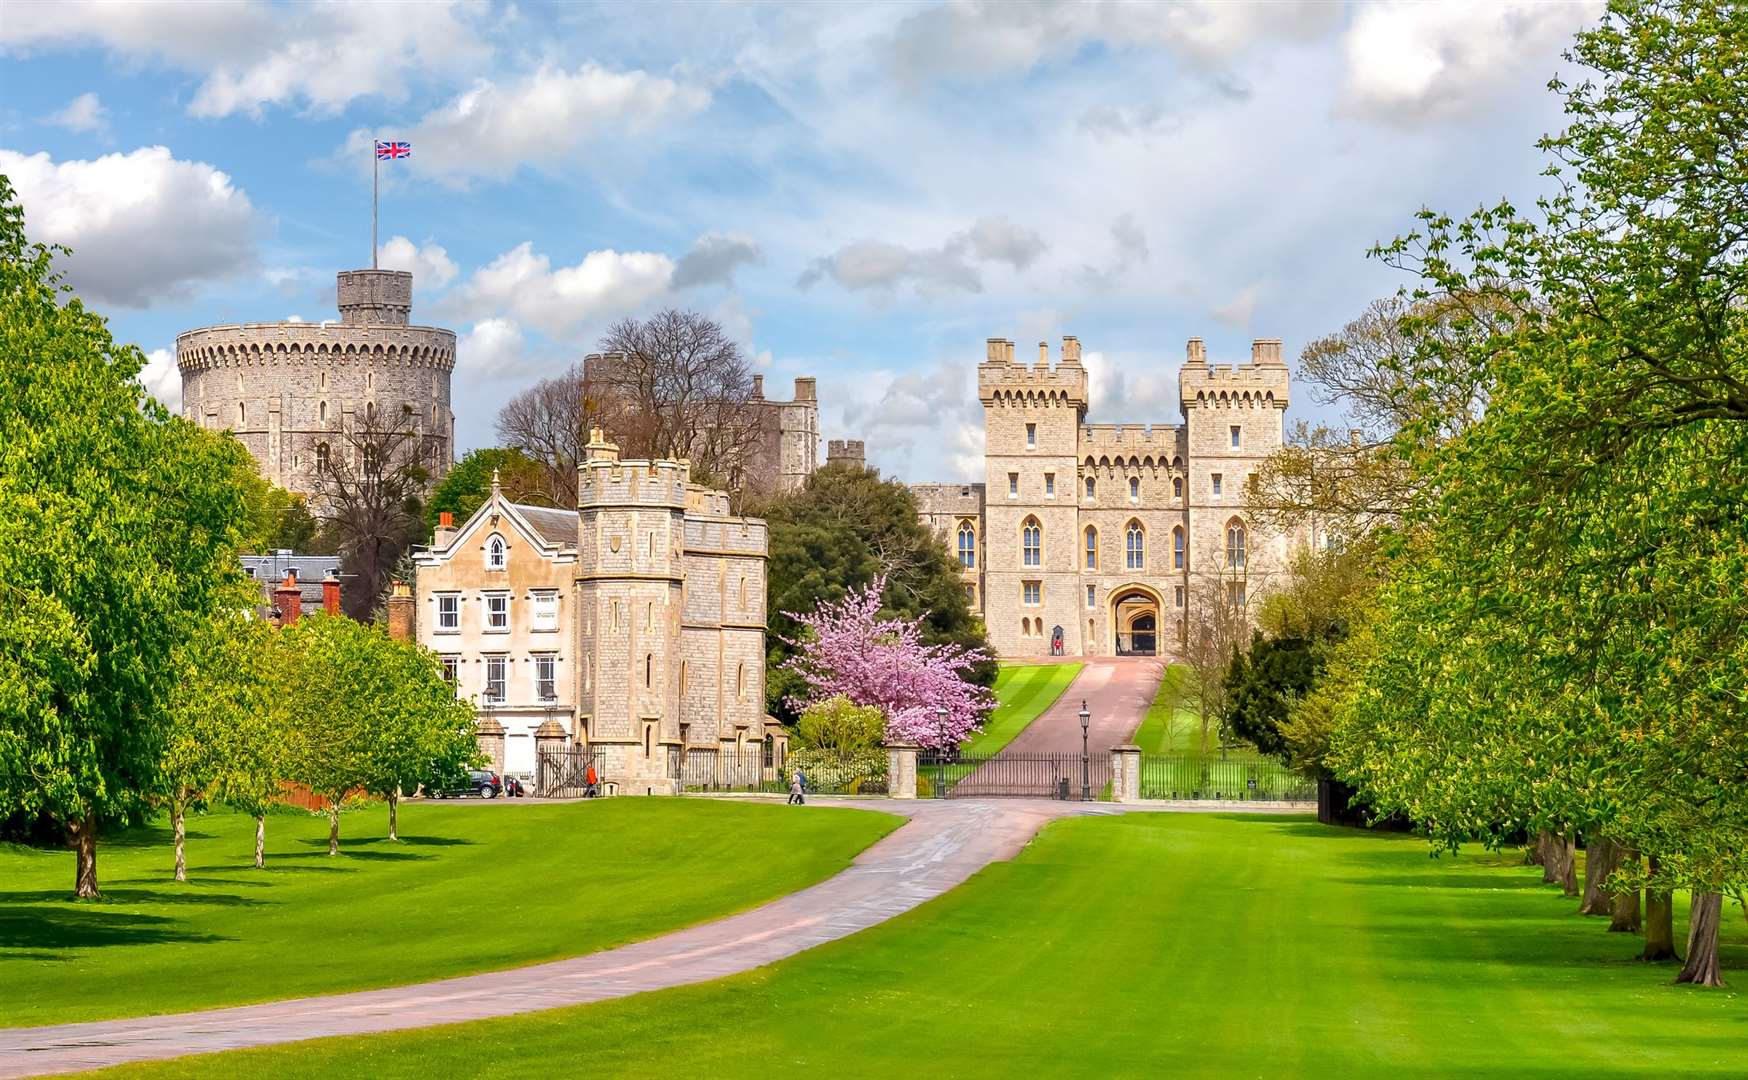 Windsor is among a small number of areas to have witnessed a decline in available holiday homes. Image: iStock.